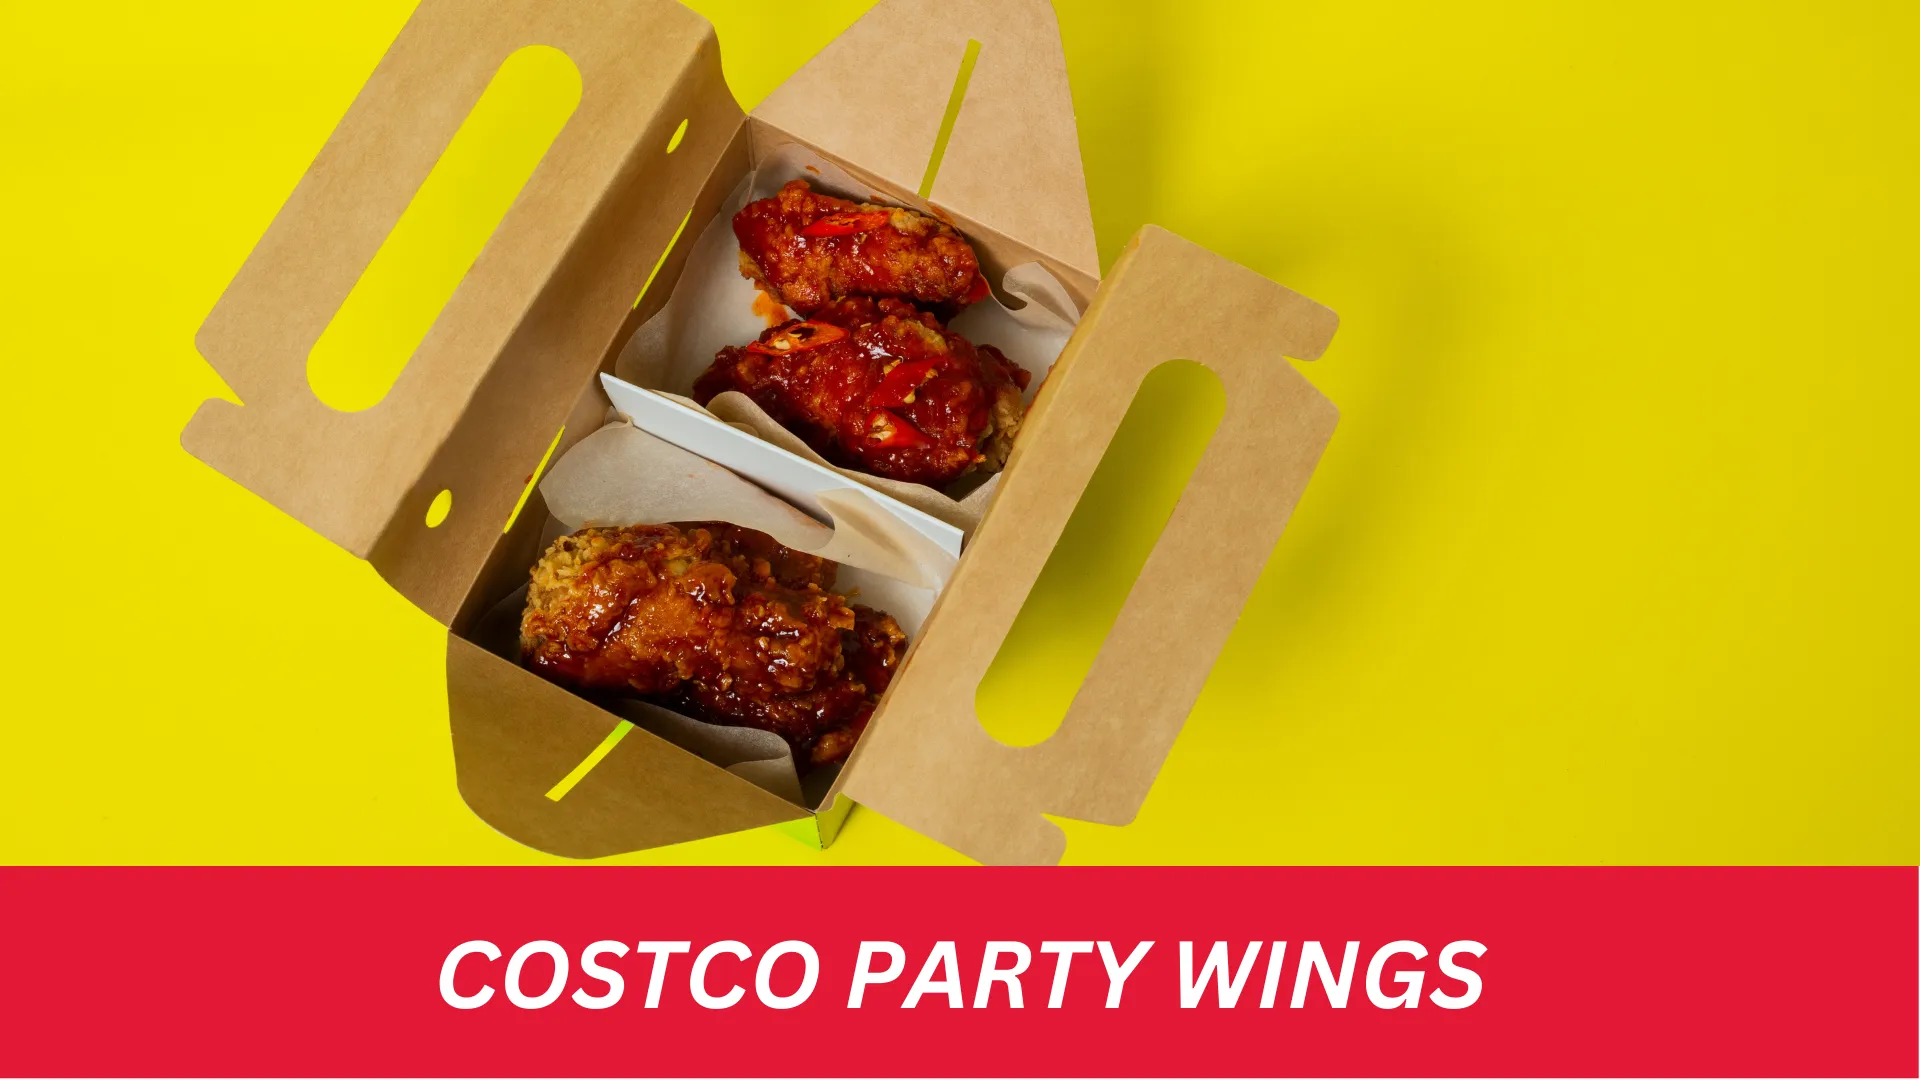 COSTCO PARTY WINGS